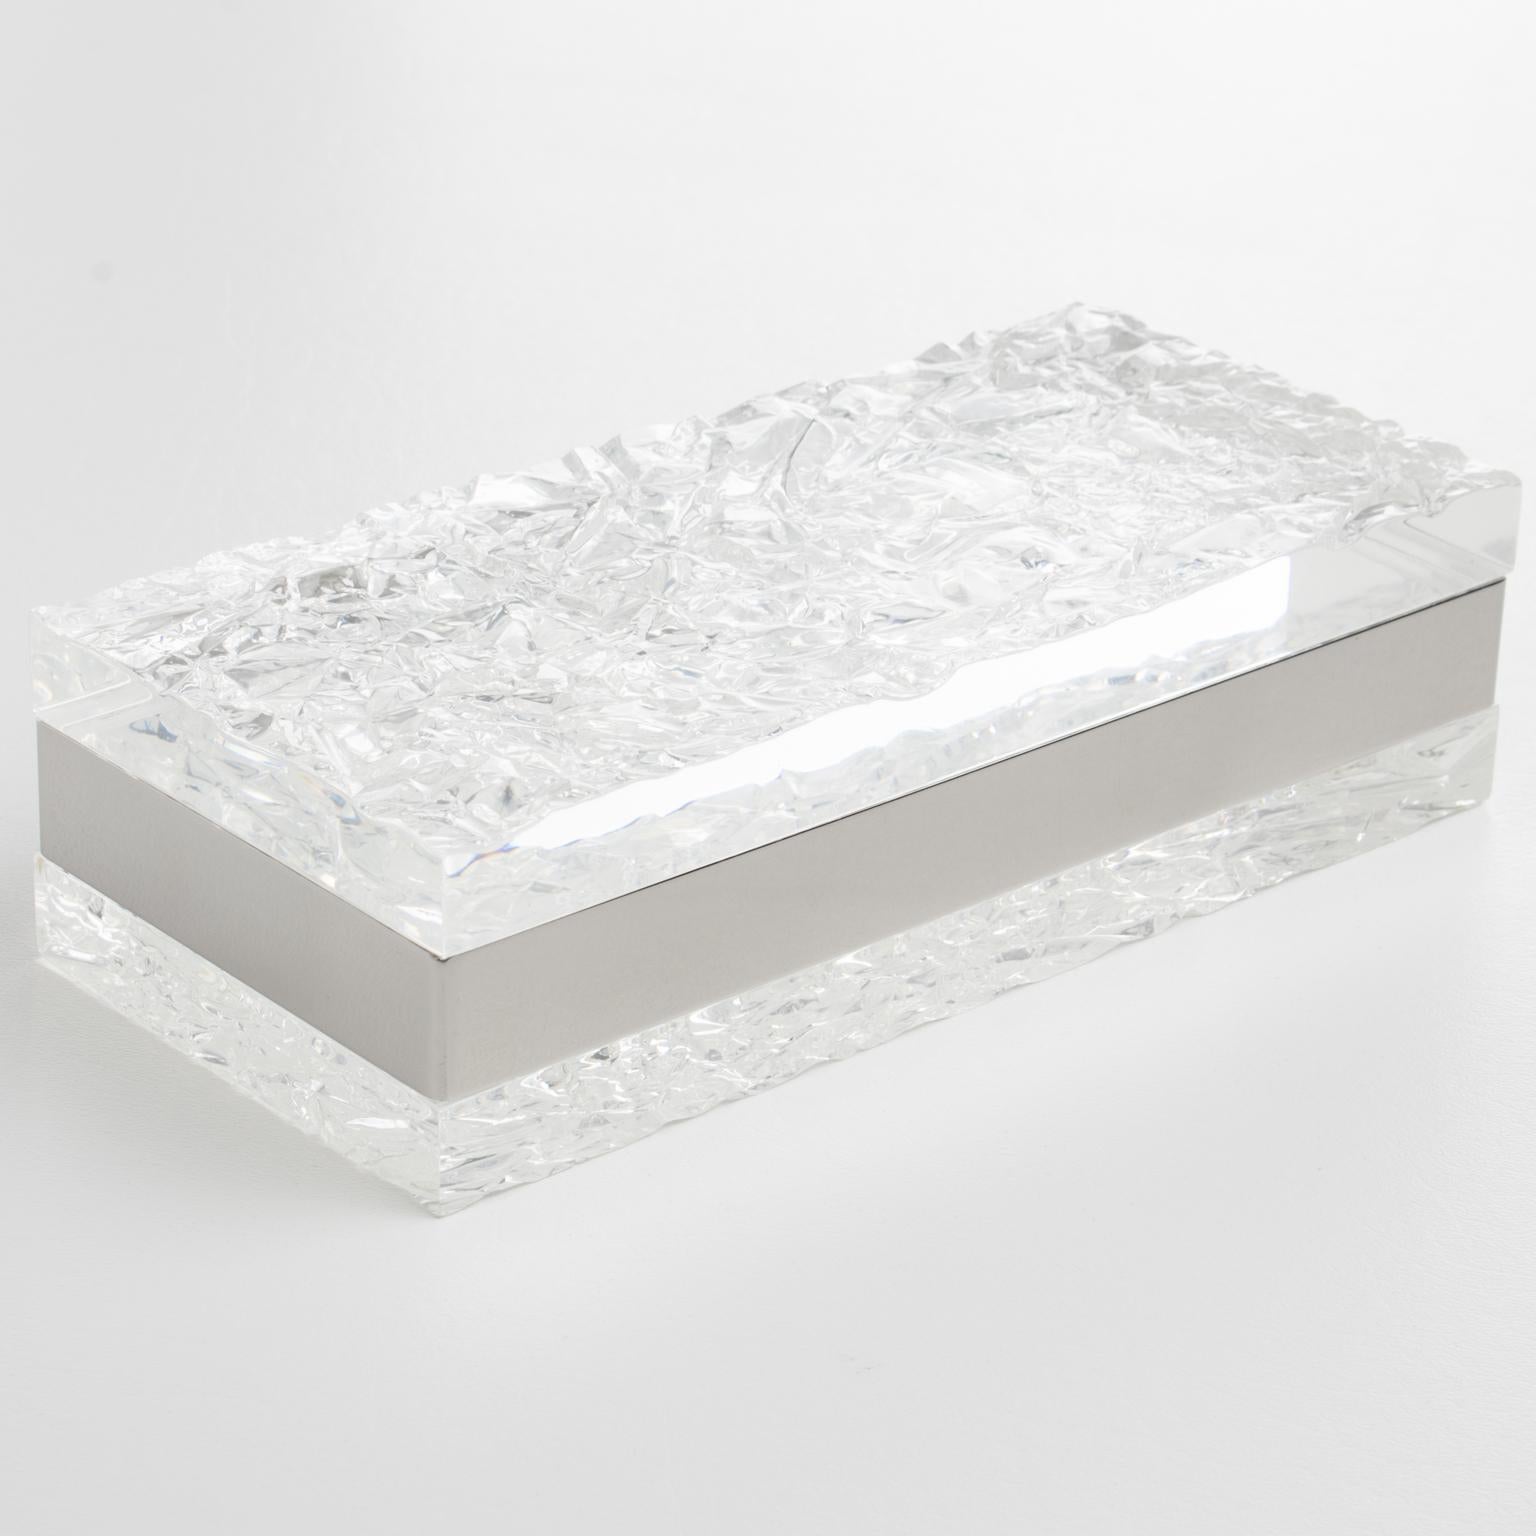 This refined modernist Lucite and chrome box has its design commonly attributed to Willy Rizzo, Italy. Crafted in the 1970s, the lovely decorative piece boasts a rectangular shape with an extra-thick transparent Lucite slab for the base and the lid